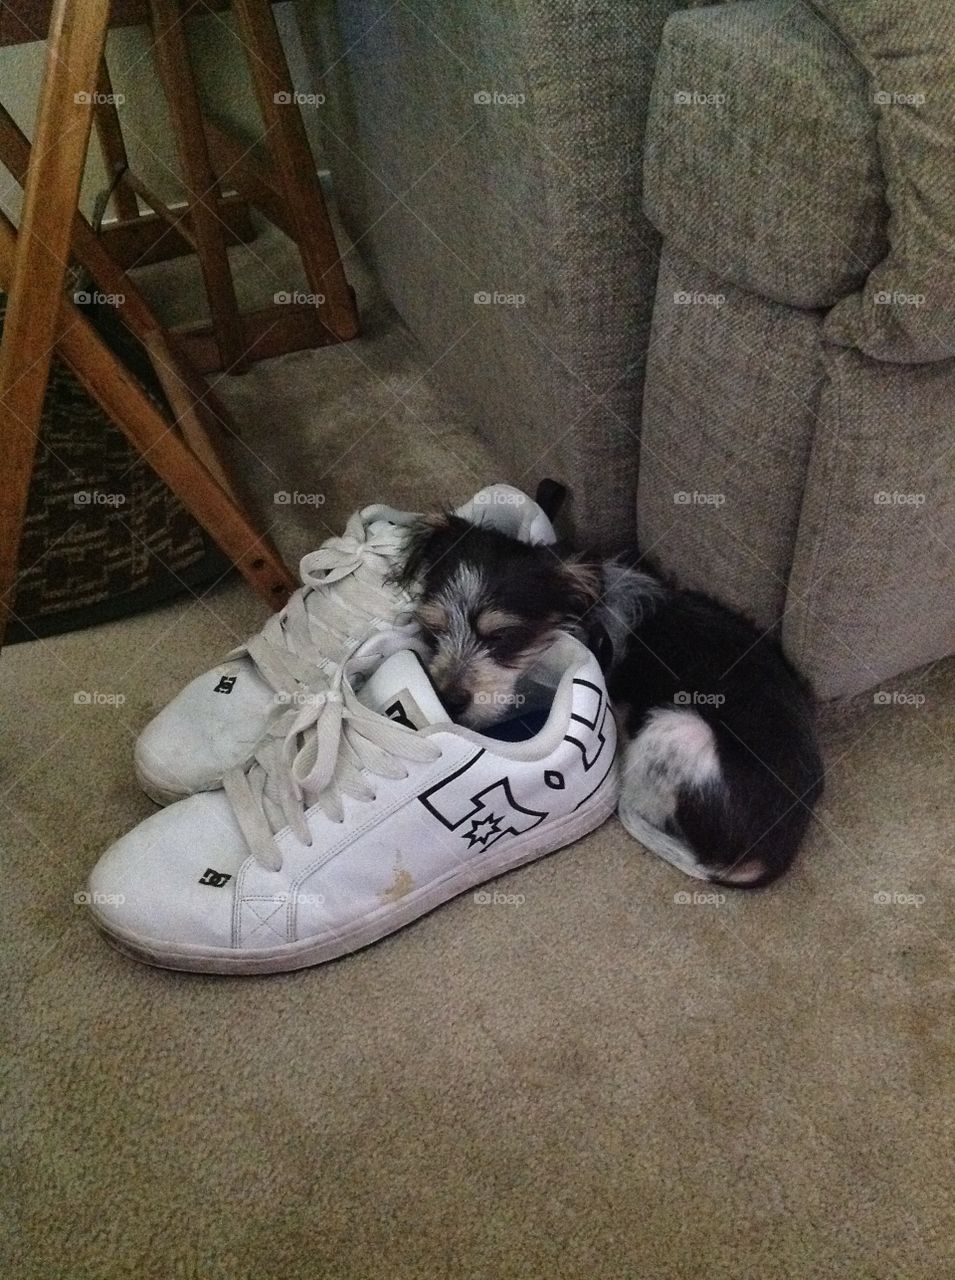 Puppy in size 15 shoes 